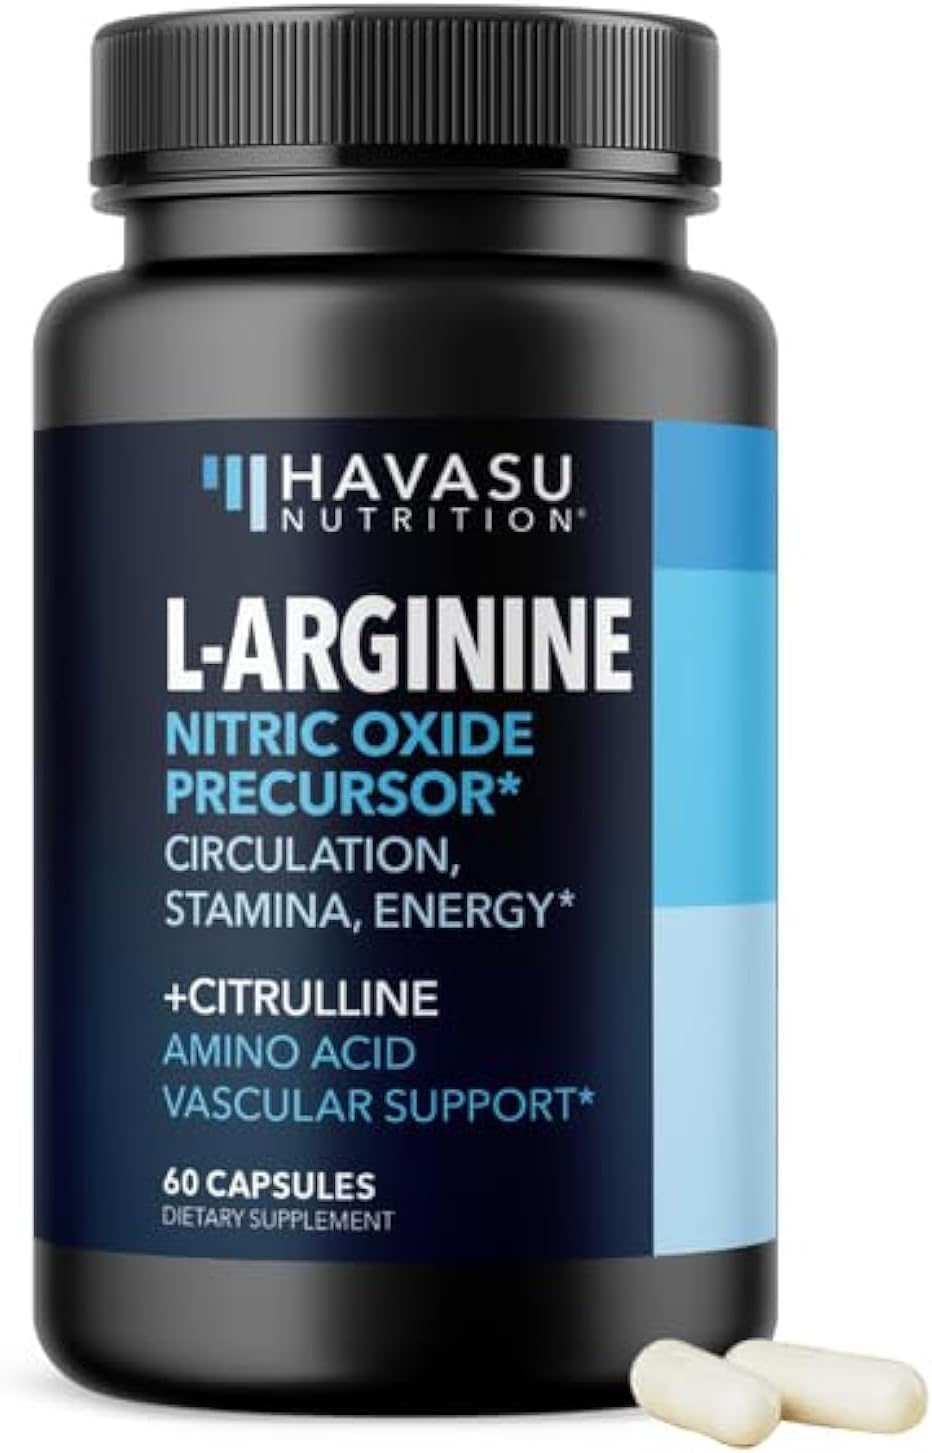 Extra Strength L-Arginine 1200mg Nitric Oxide Booster for Muscle Growth, Libido, Vascularity & E